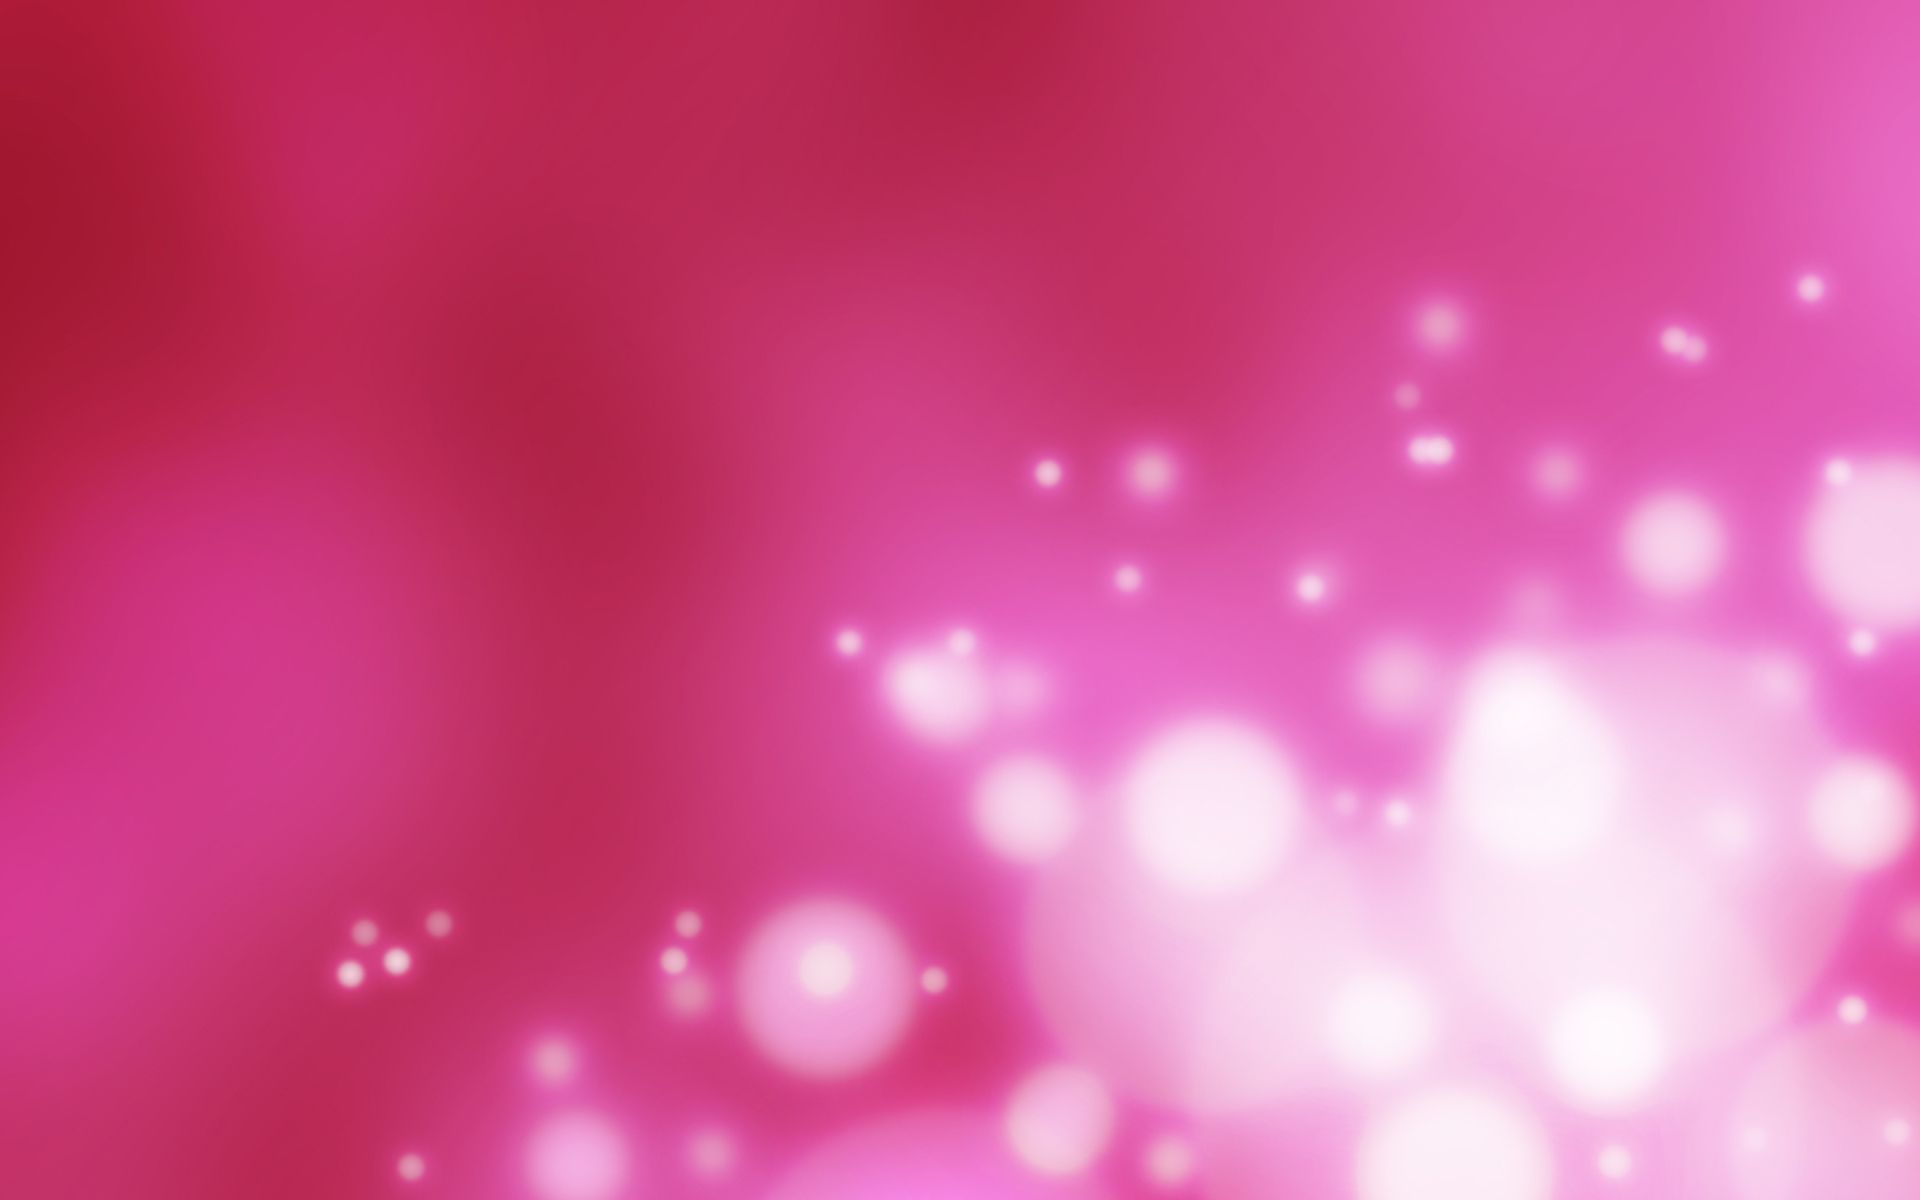 ... blur-white-and-pink-abstract-backgrounds ...